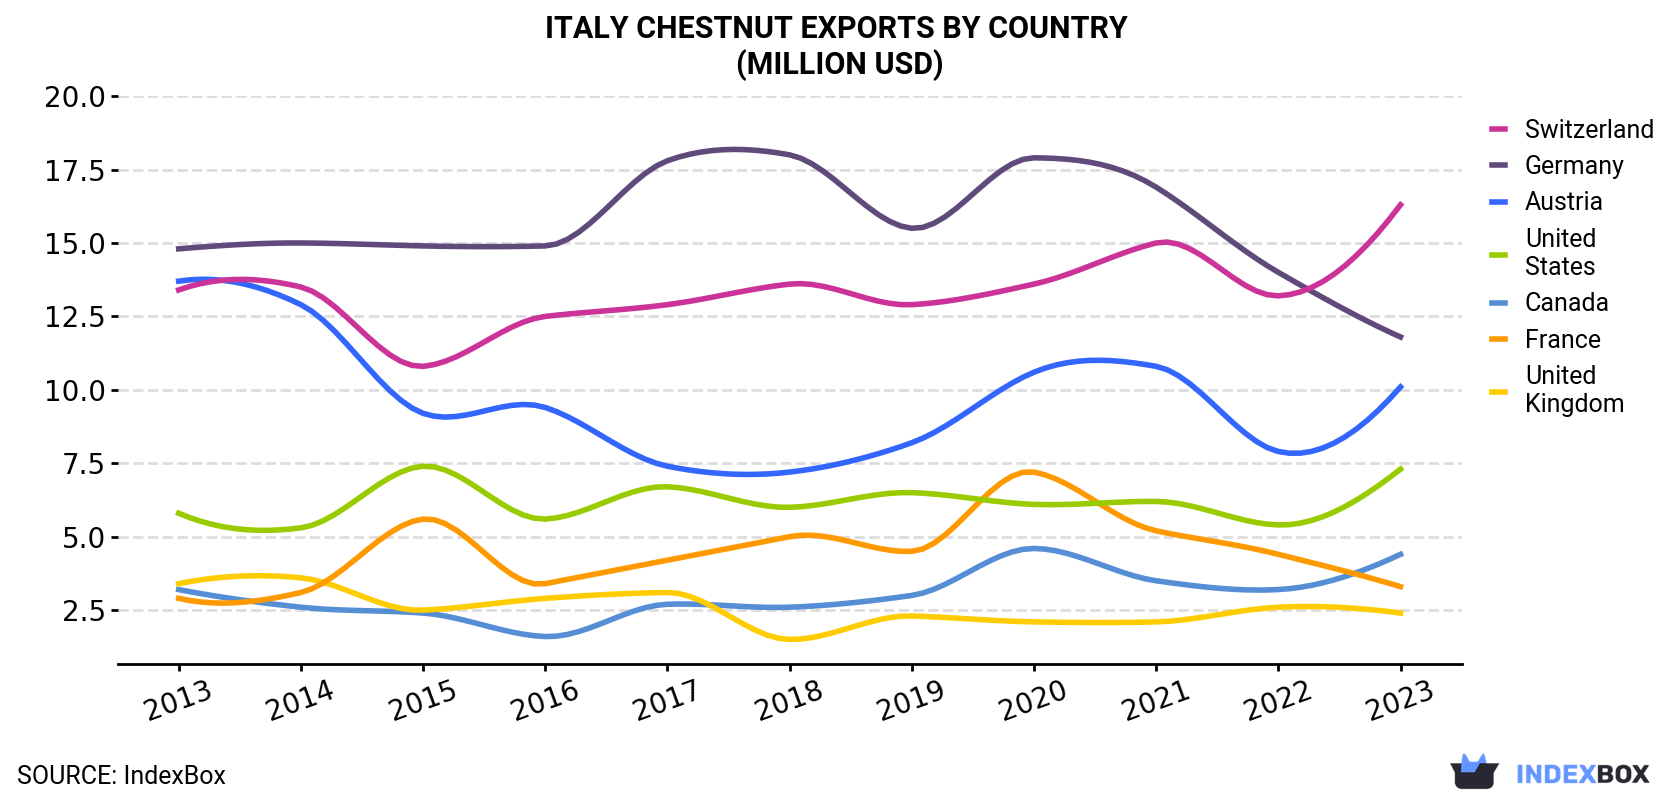 Italy Chestnut Exports By Country (Million USD)